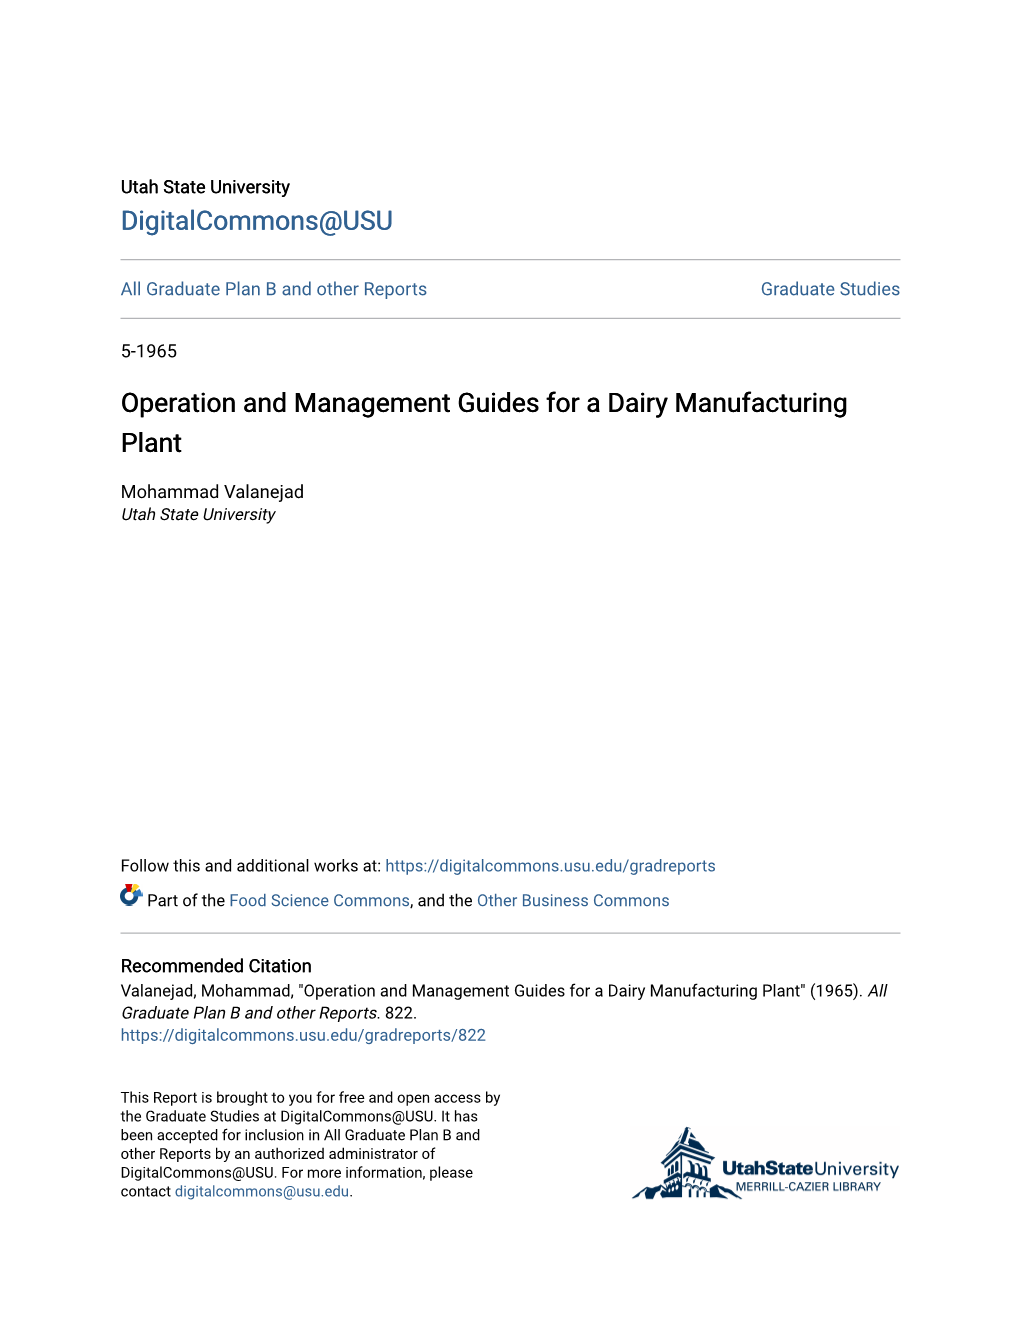 Operation and Management Guides for a Dairy Manufacturing Plant